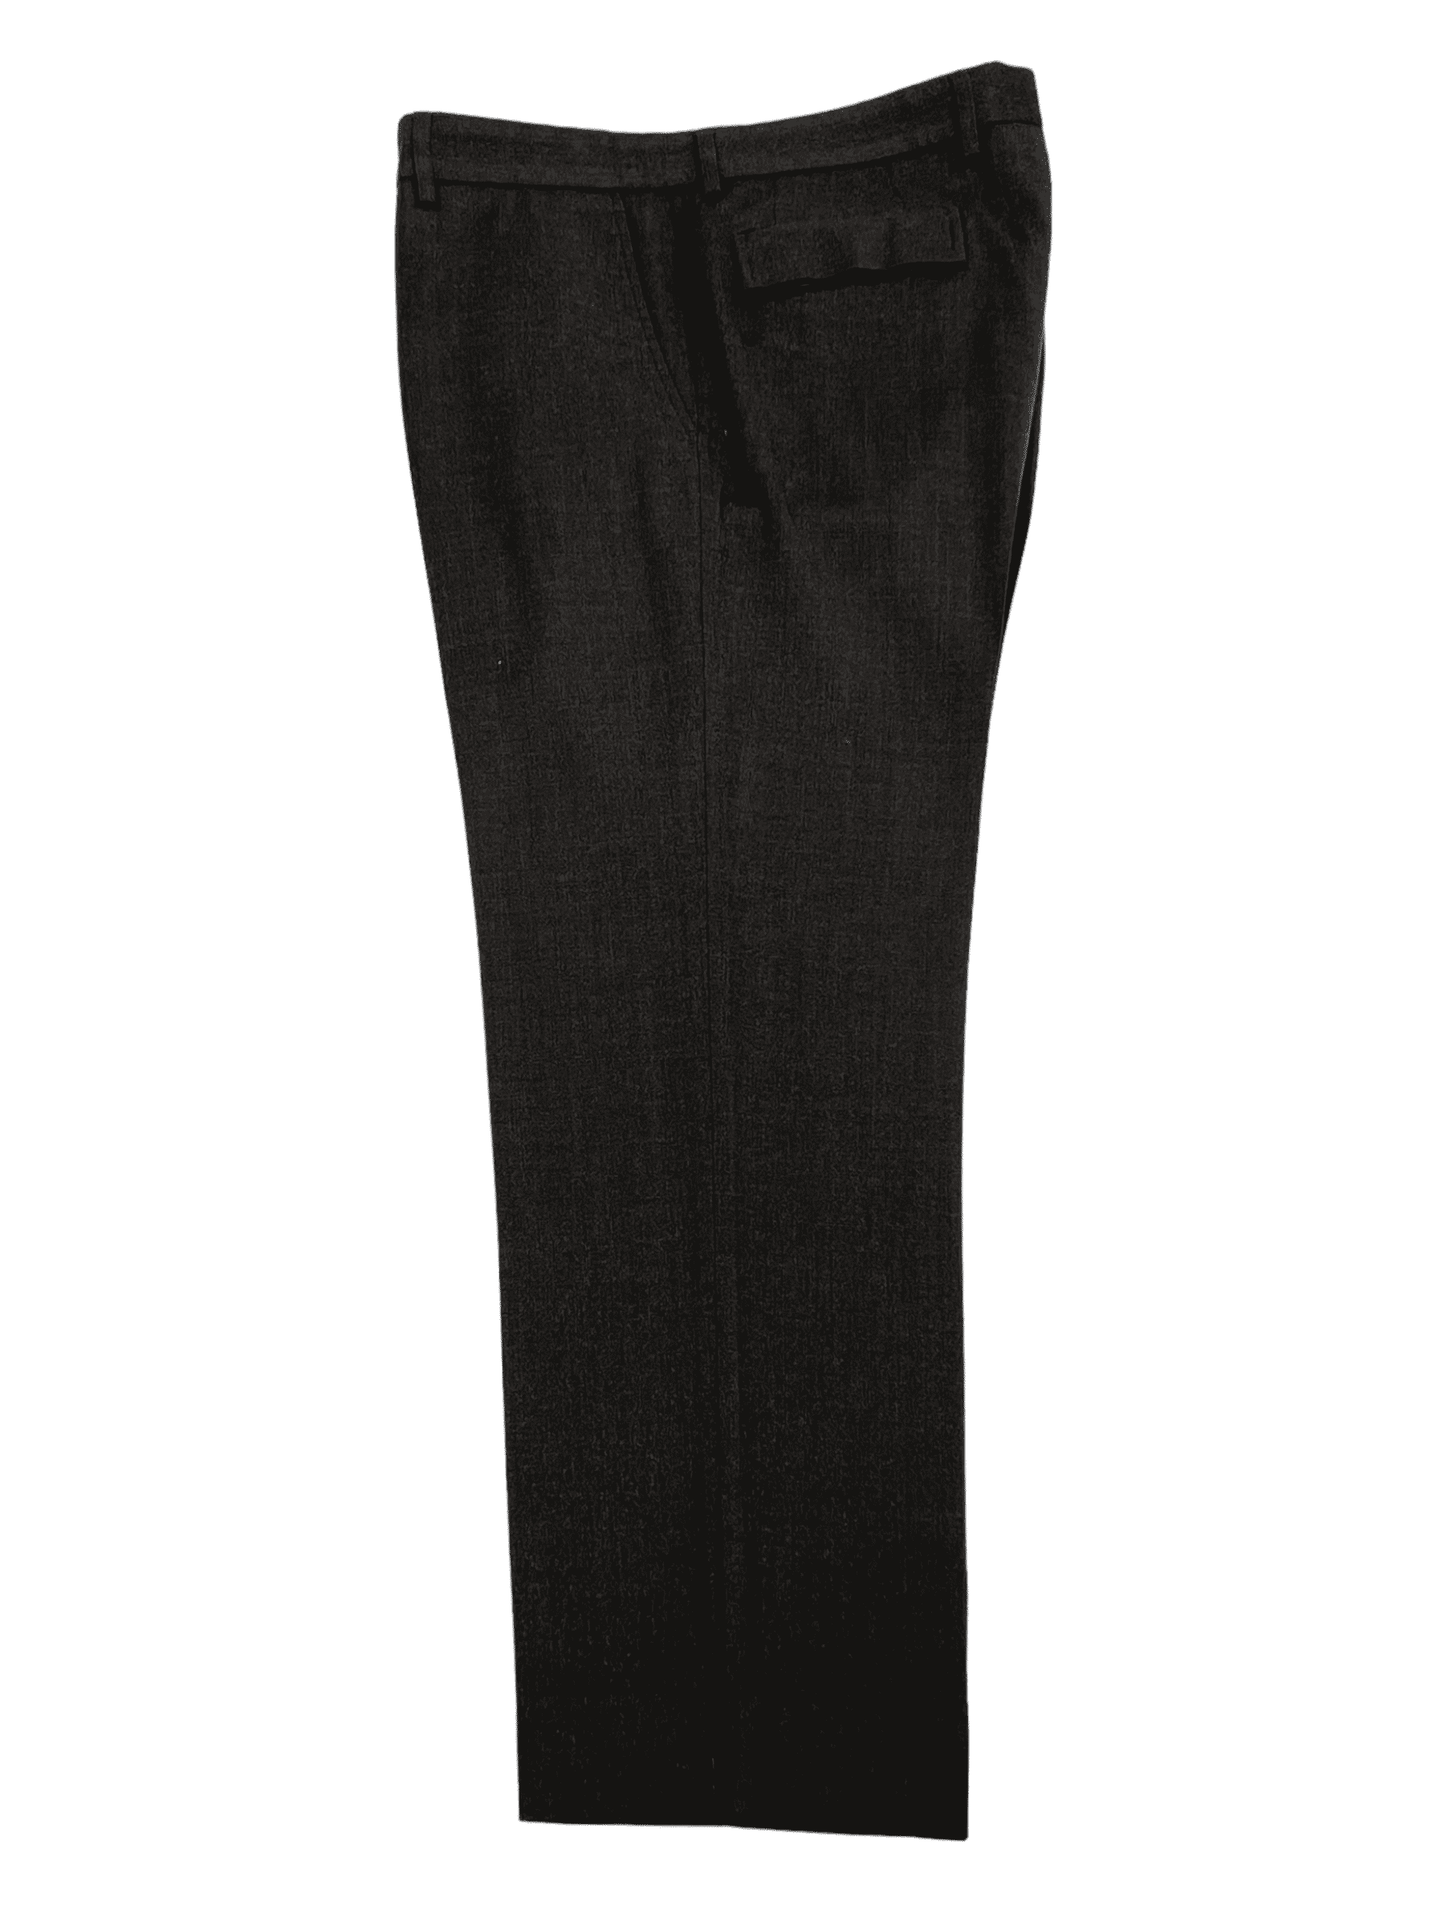 Hugo Boss Charcoal Grey Wool Dress Pant 37W 29L - Genuine Design Luxury Consignment Calgary, Alberta, Canada New and Pre-Owned Clothing, Shoes, Accessories.